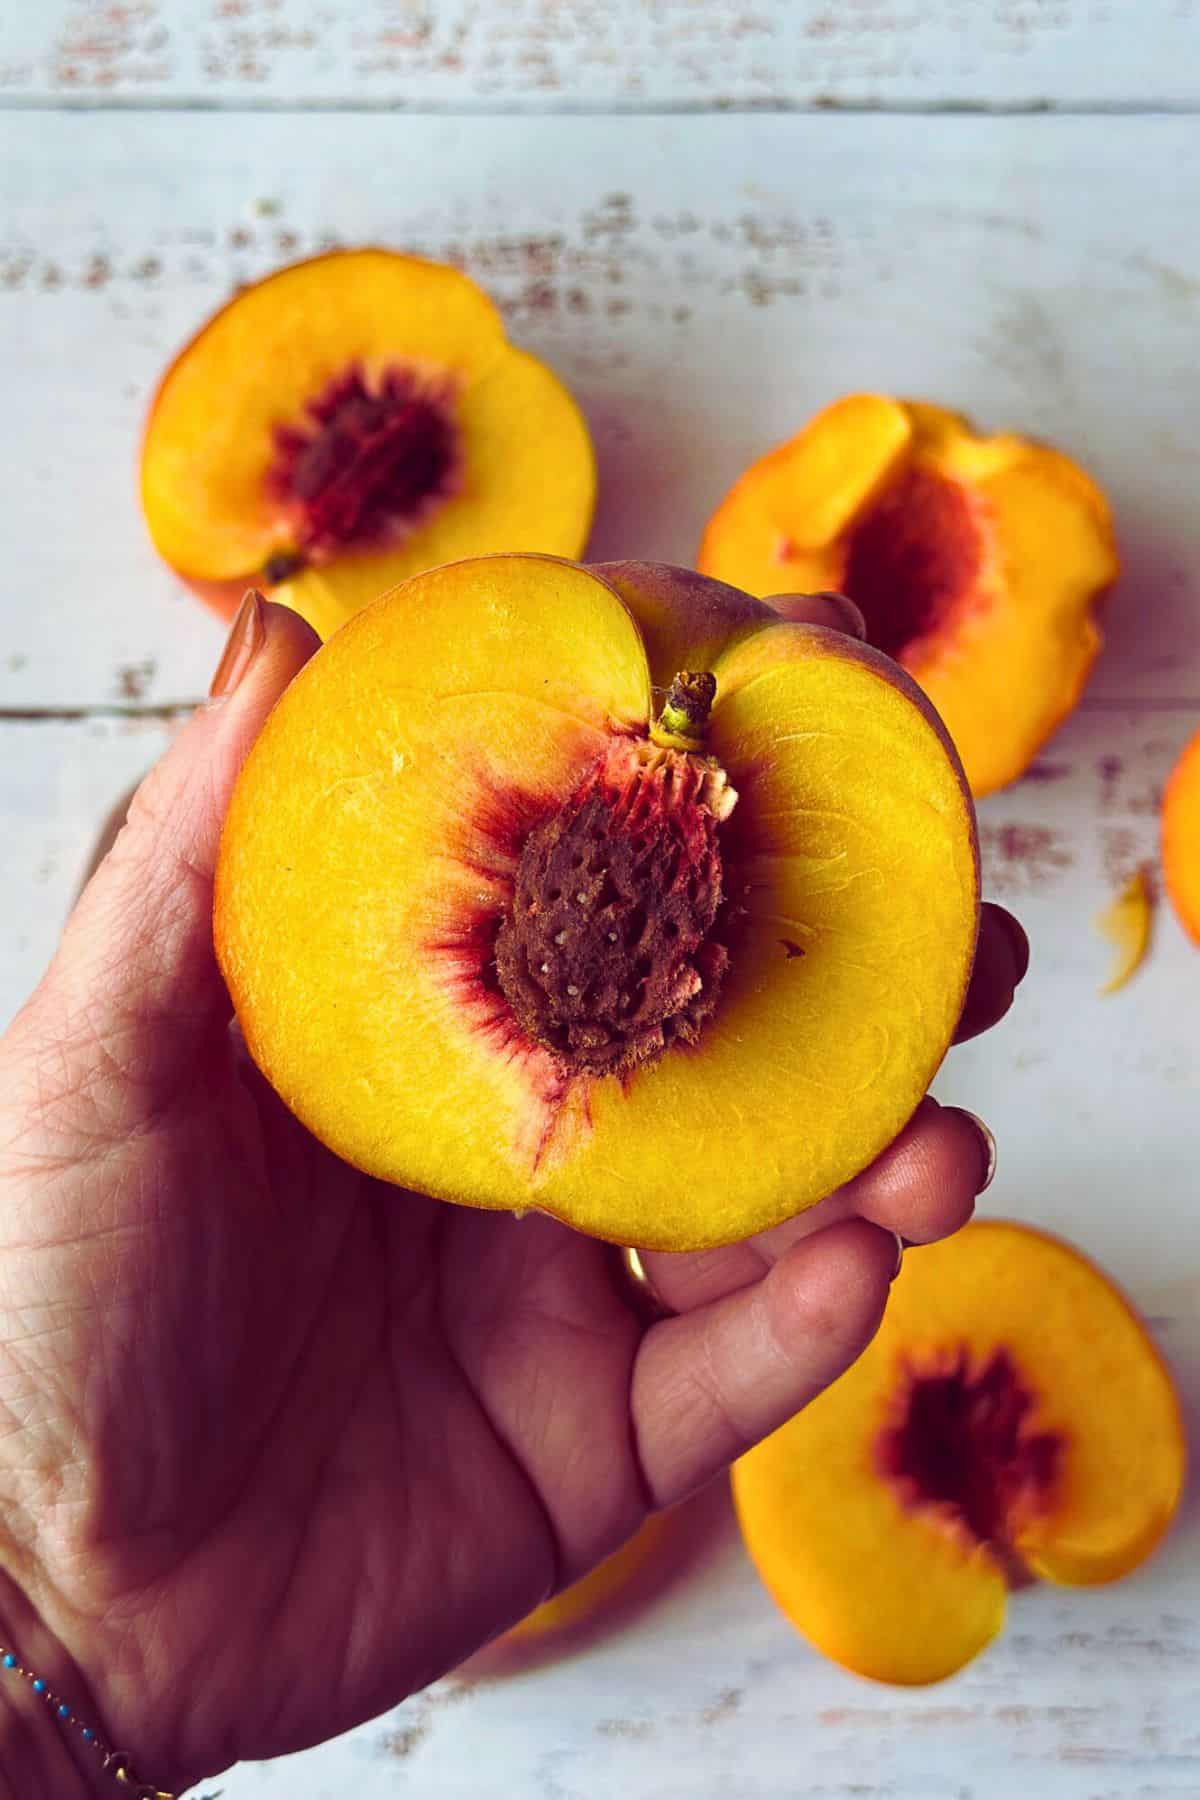 Preparing peaches for grilled peaches with vegan mascarpone. Hand holding a cut ripe peach with pit